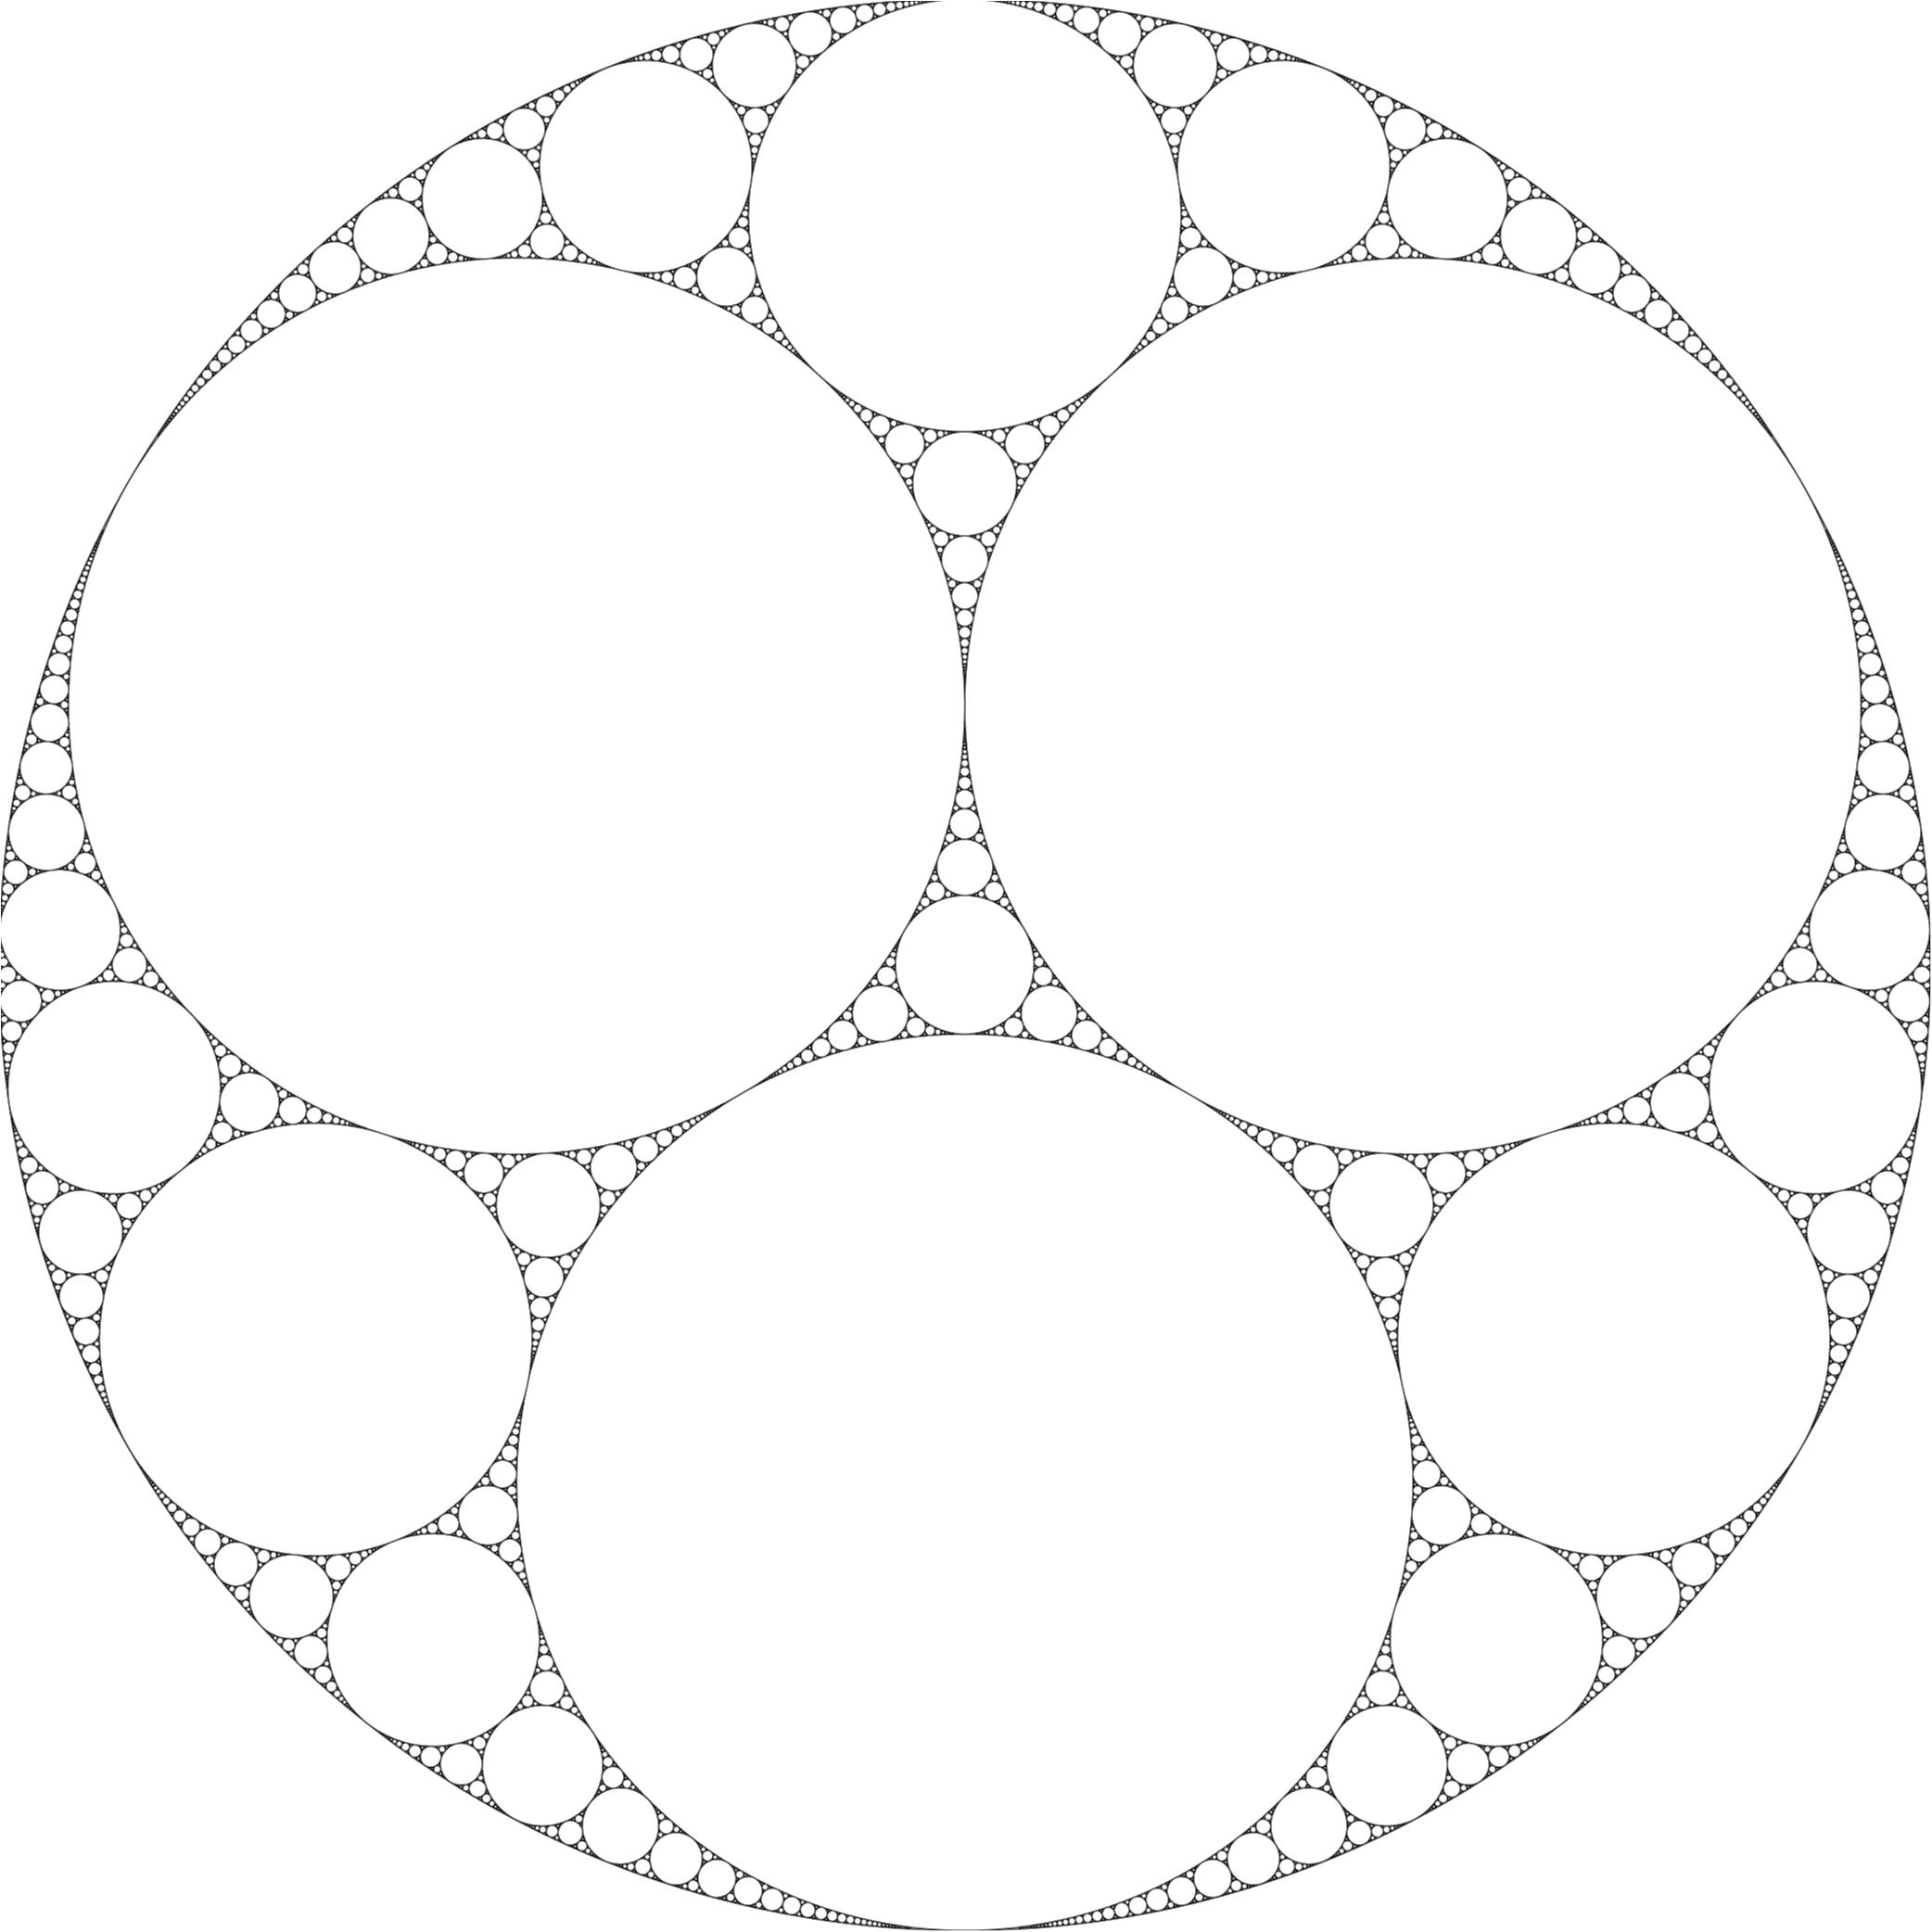 Estimate for the fractal dimension of the Apollonian gasket in d dimensions